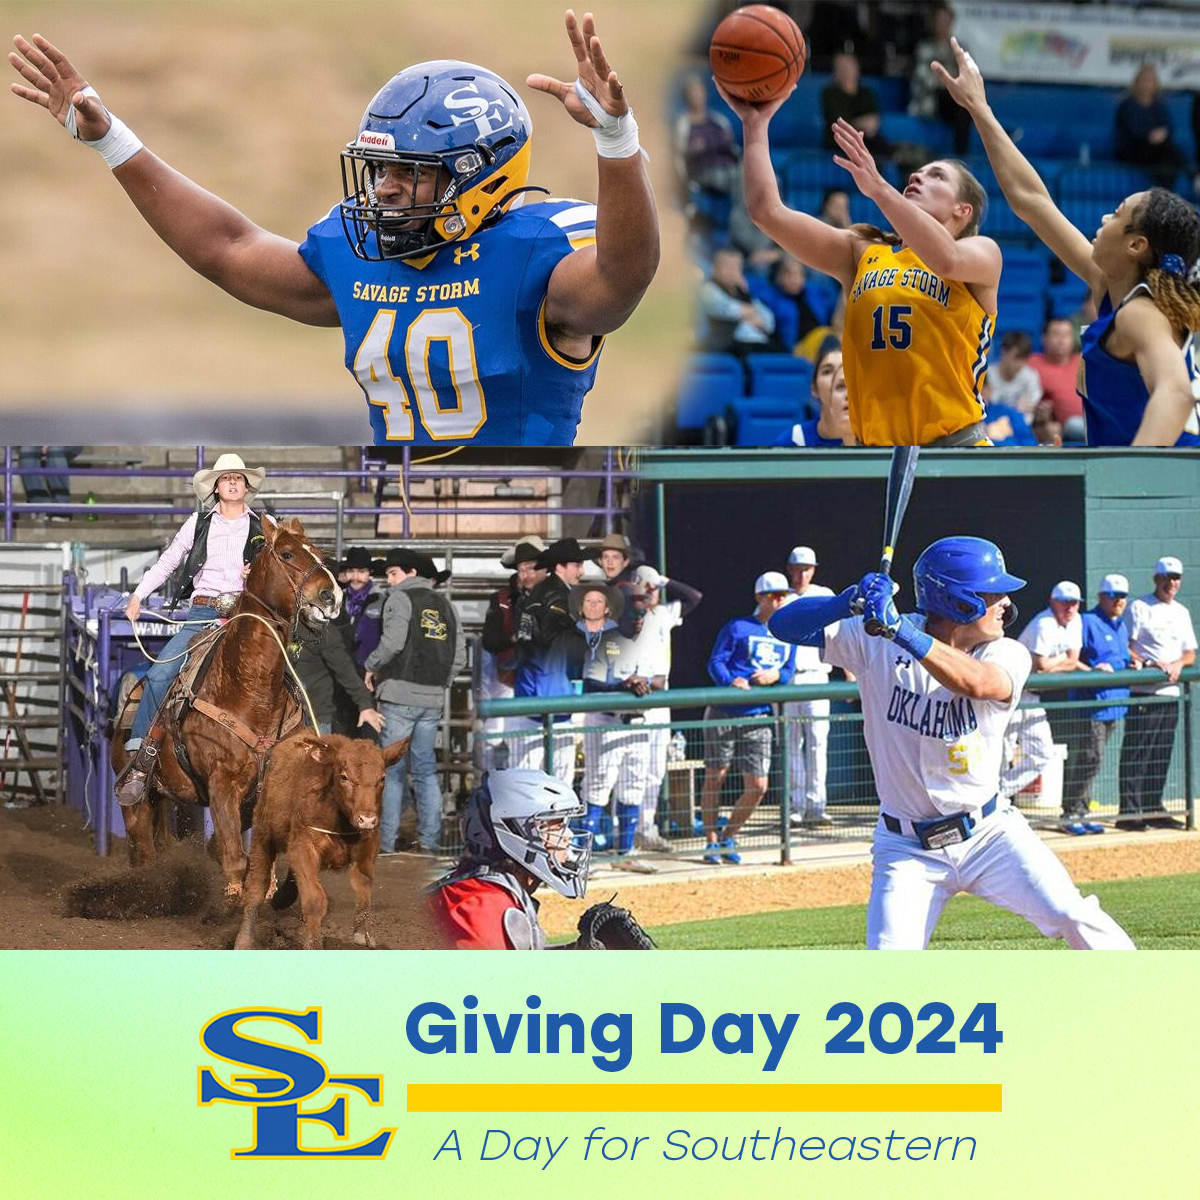 Next Wednesday, March 6, is our first-ever Giving Day: “A Day For Southeastern”! More information on how, when, and why you can give to support “A Day For Southeastern” is available at givingday.se.edu. #SELegacy